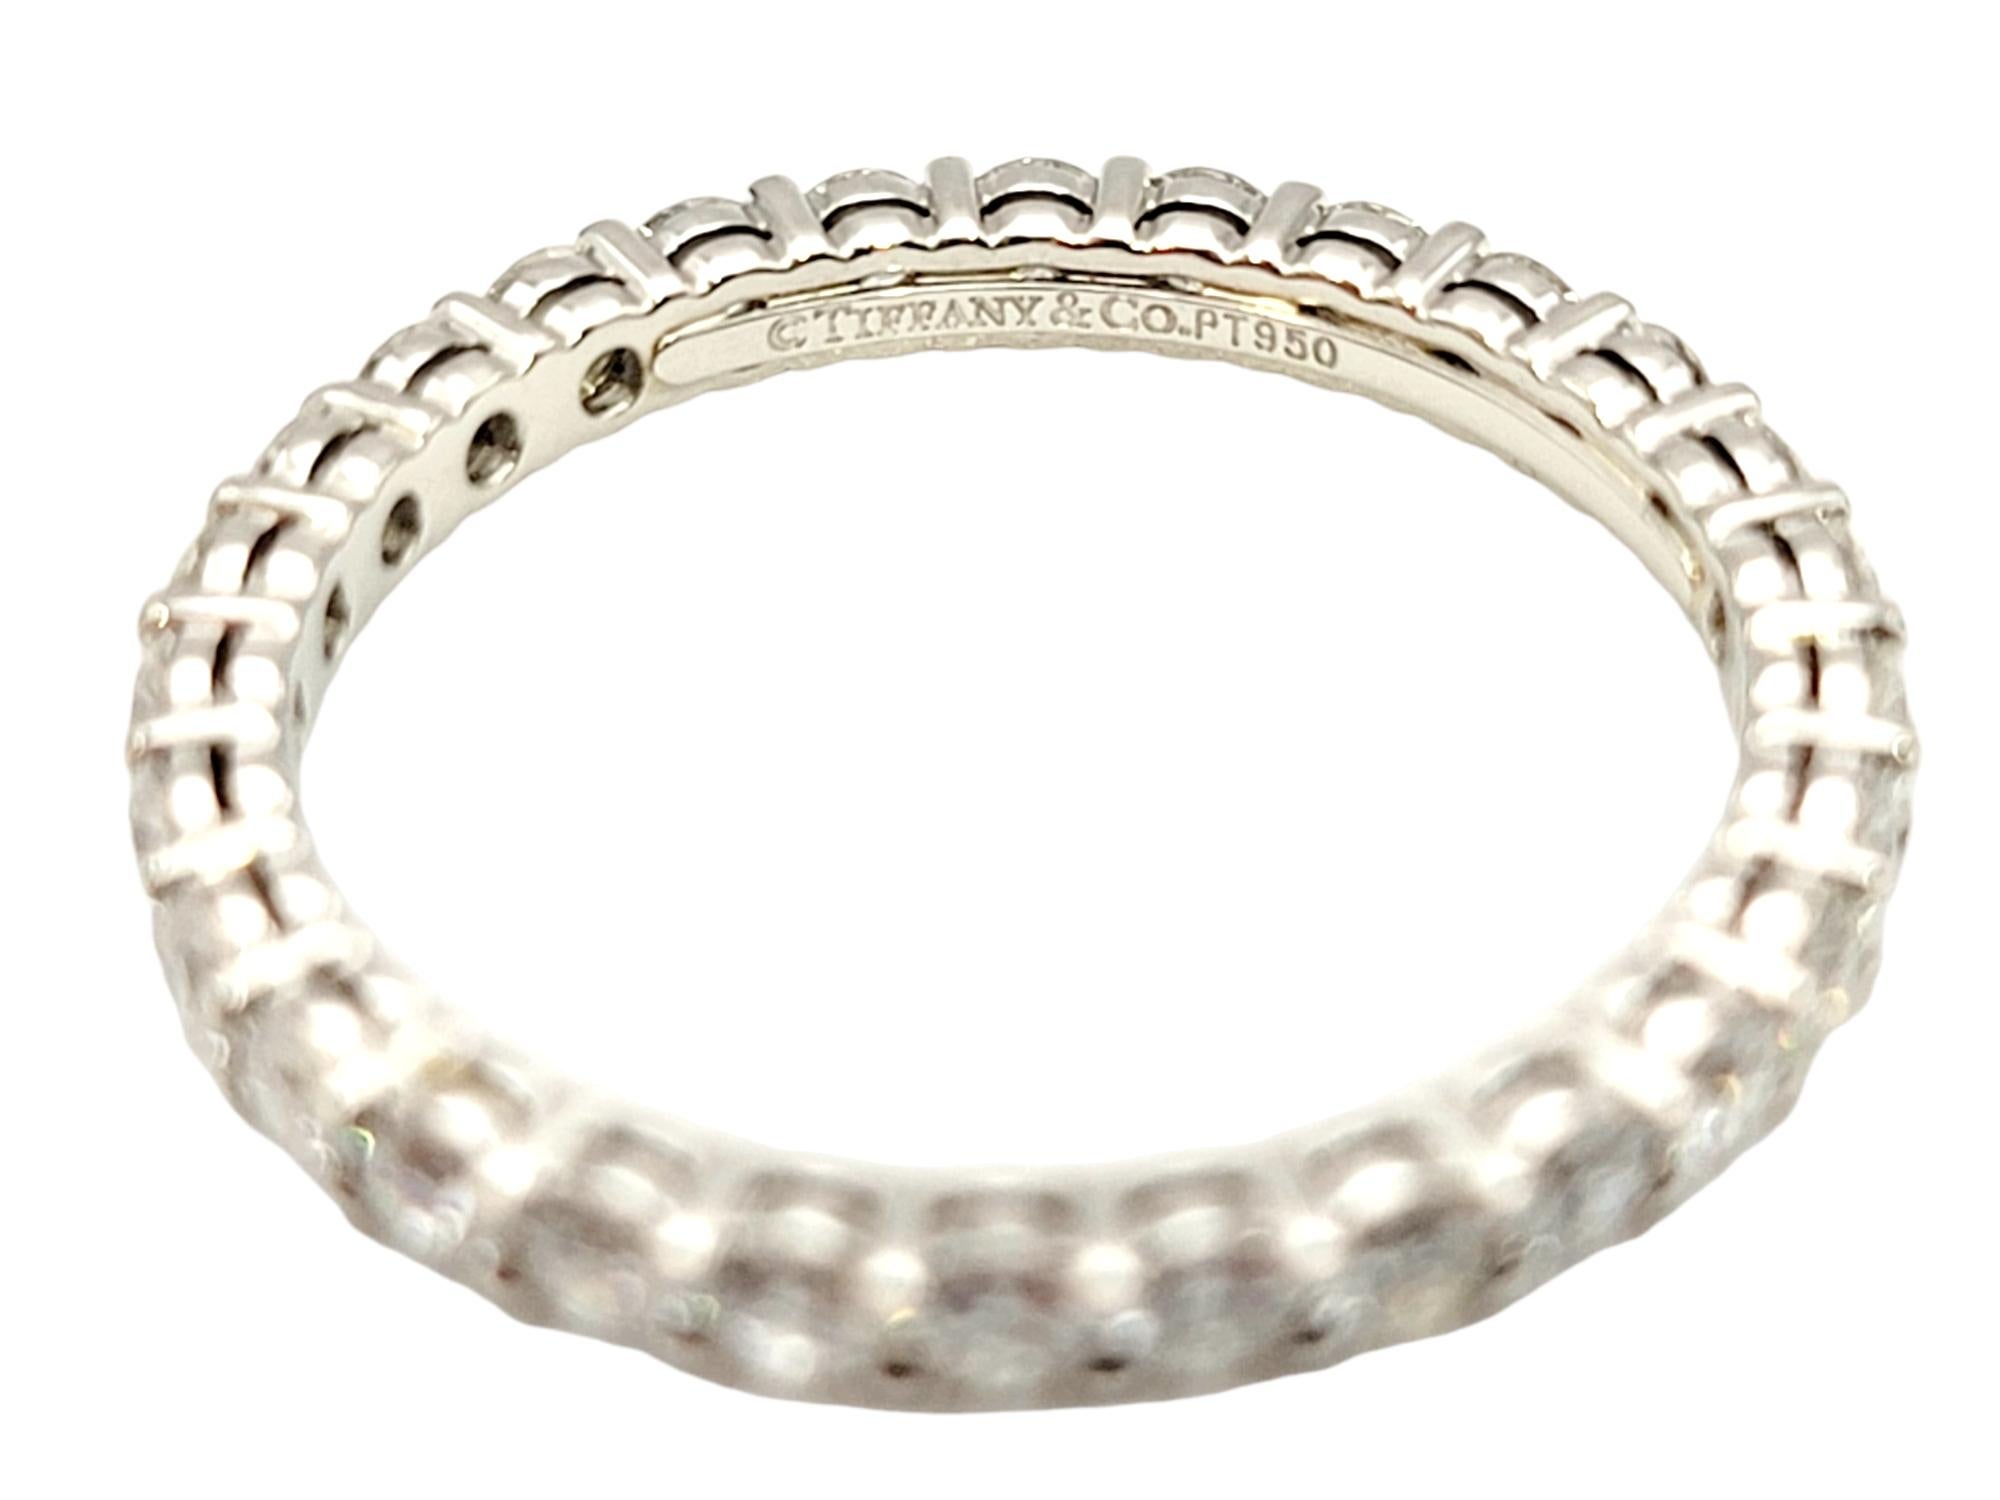 Contemporary Tiffany & Co. Embrace Full Eternity Diamond Platinum Band Ring .85 Carat Total